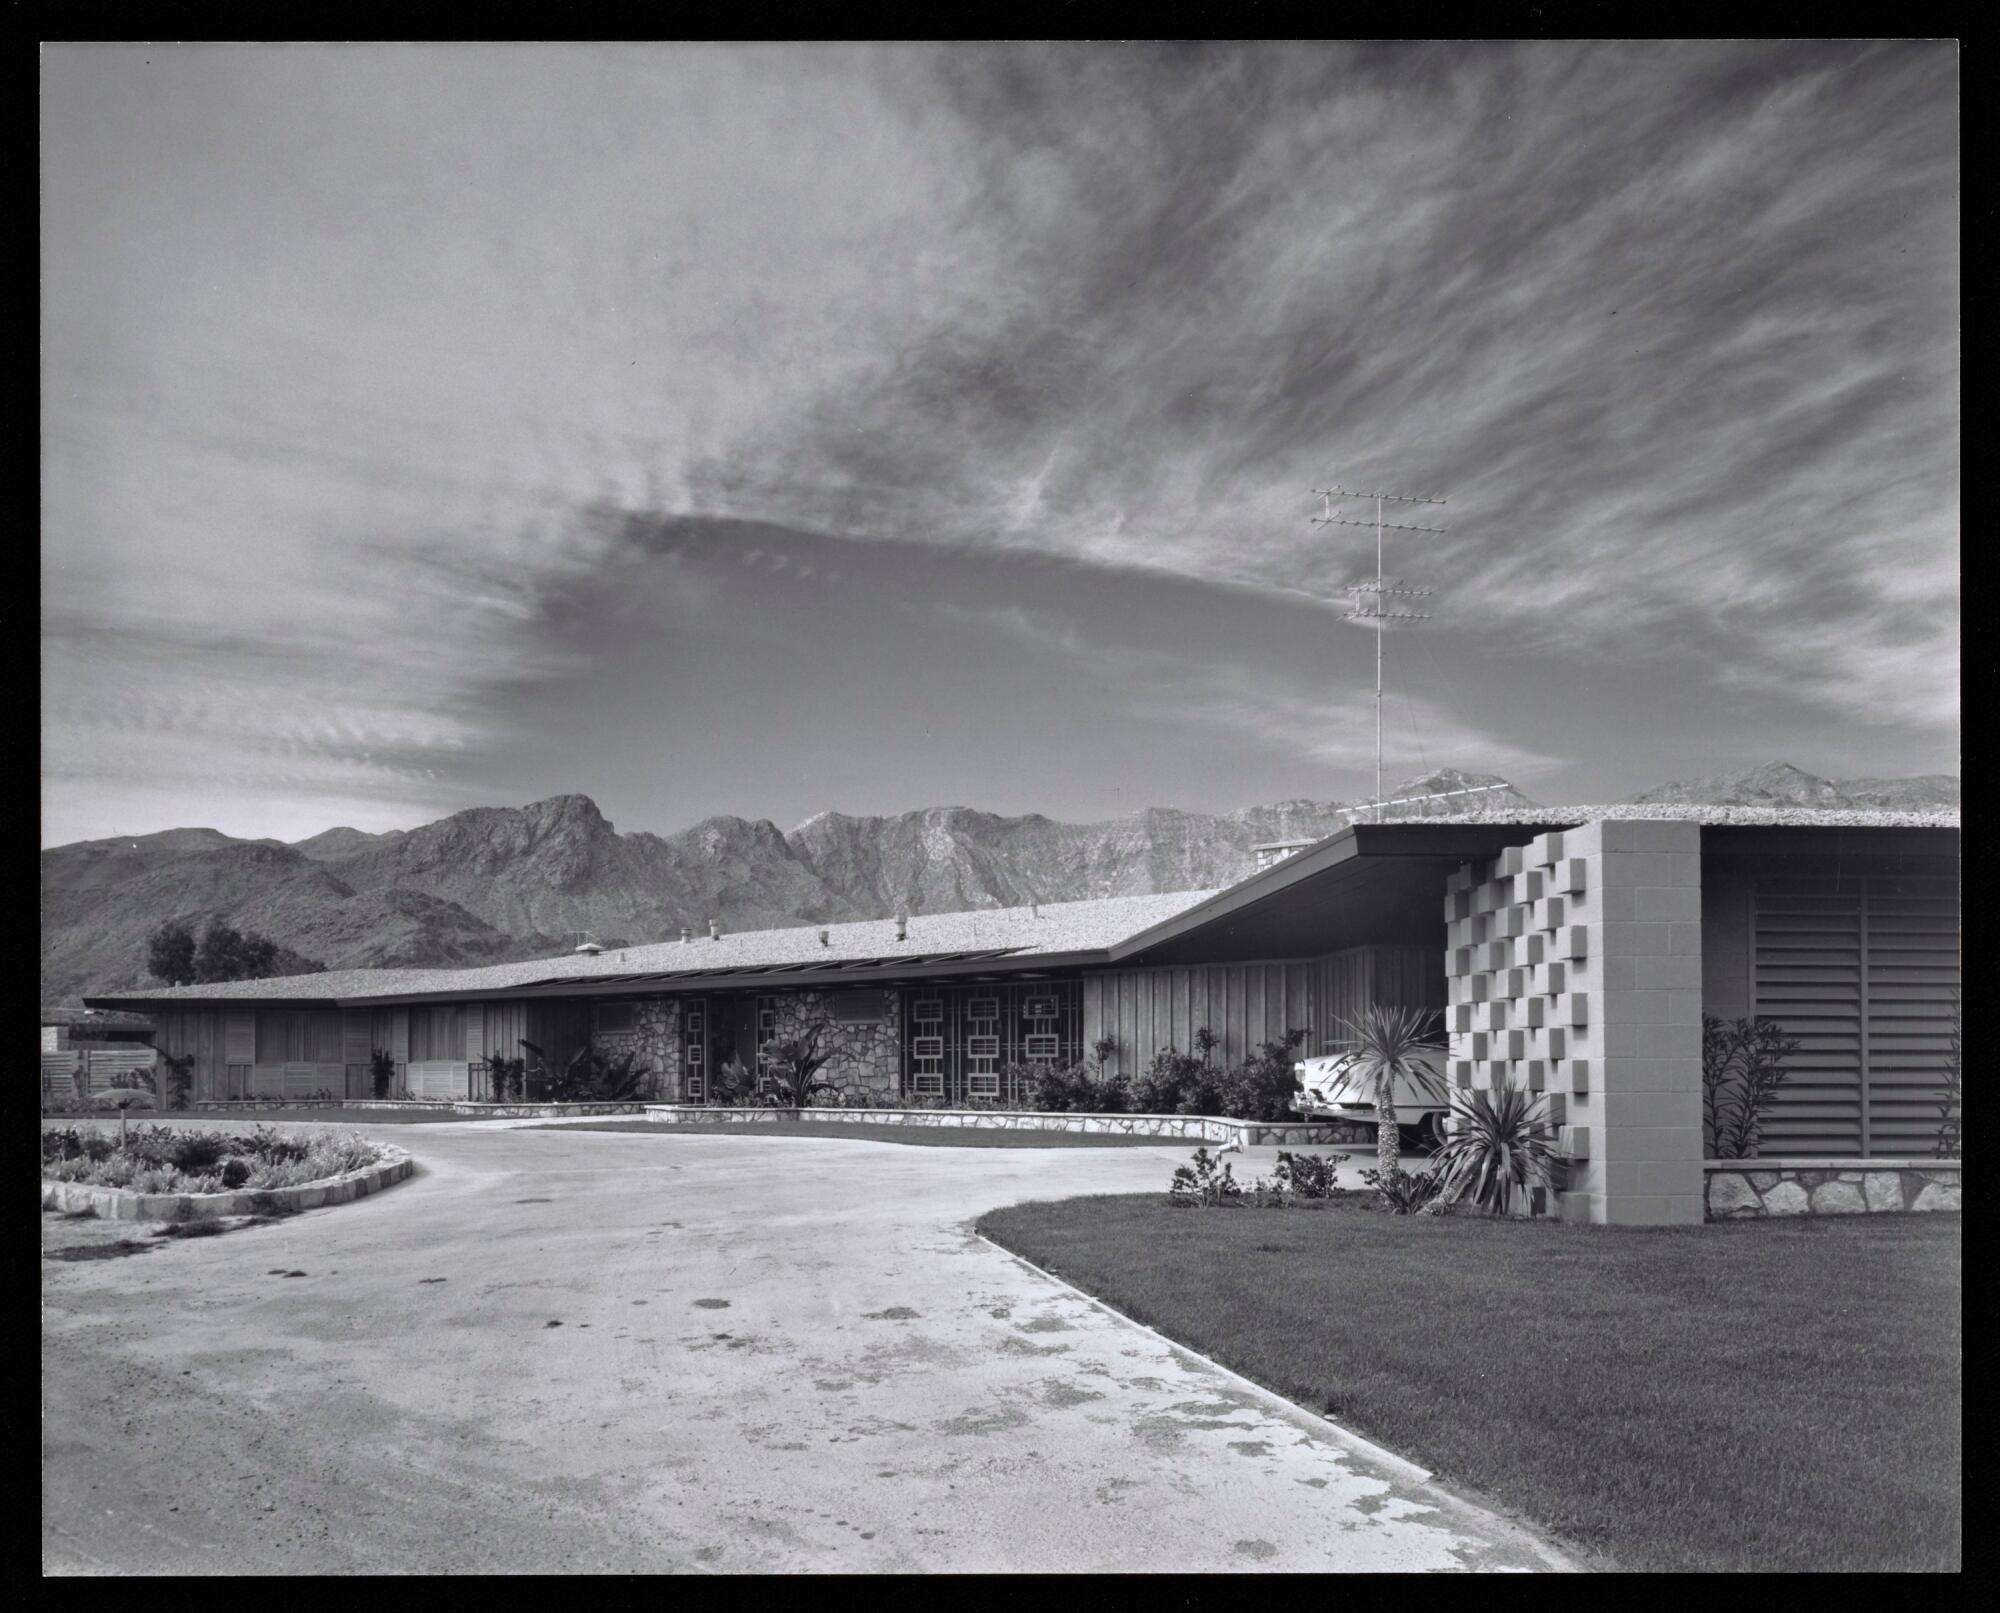 A black-and-white photo shows a low-slung Modern home with the San Jacinto Mountains in the distance.